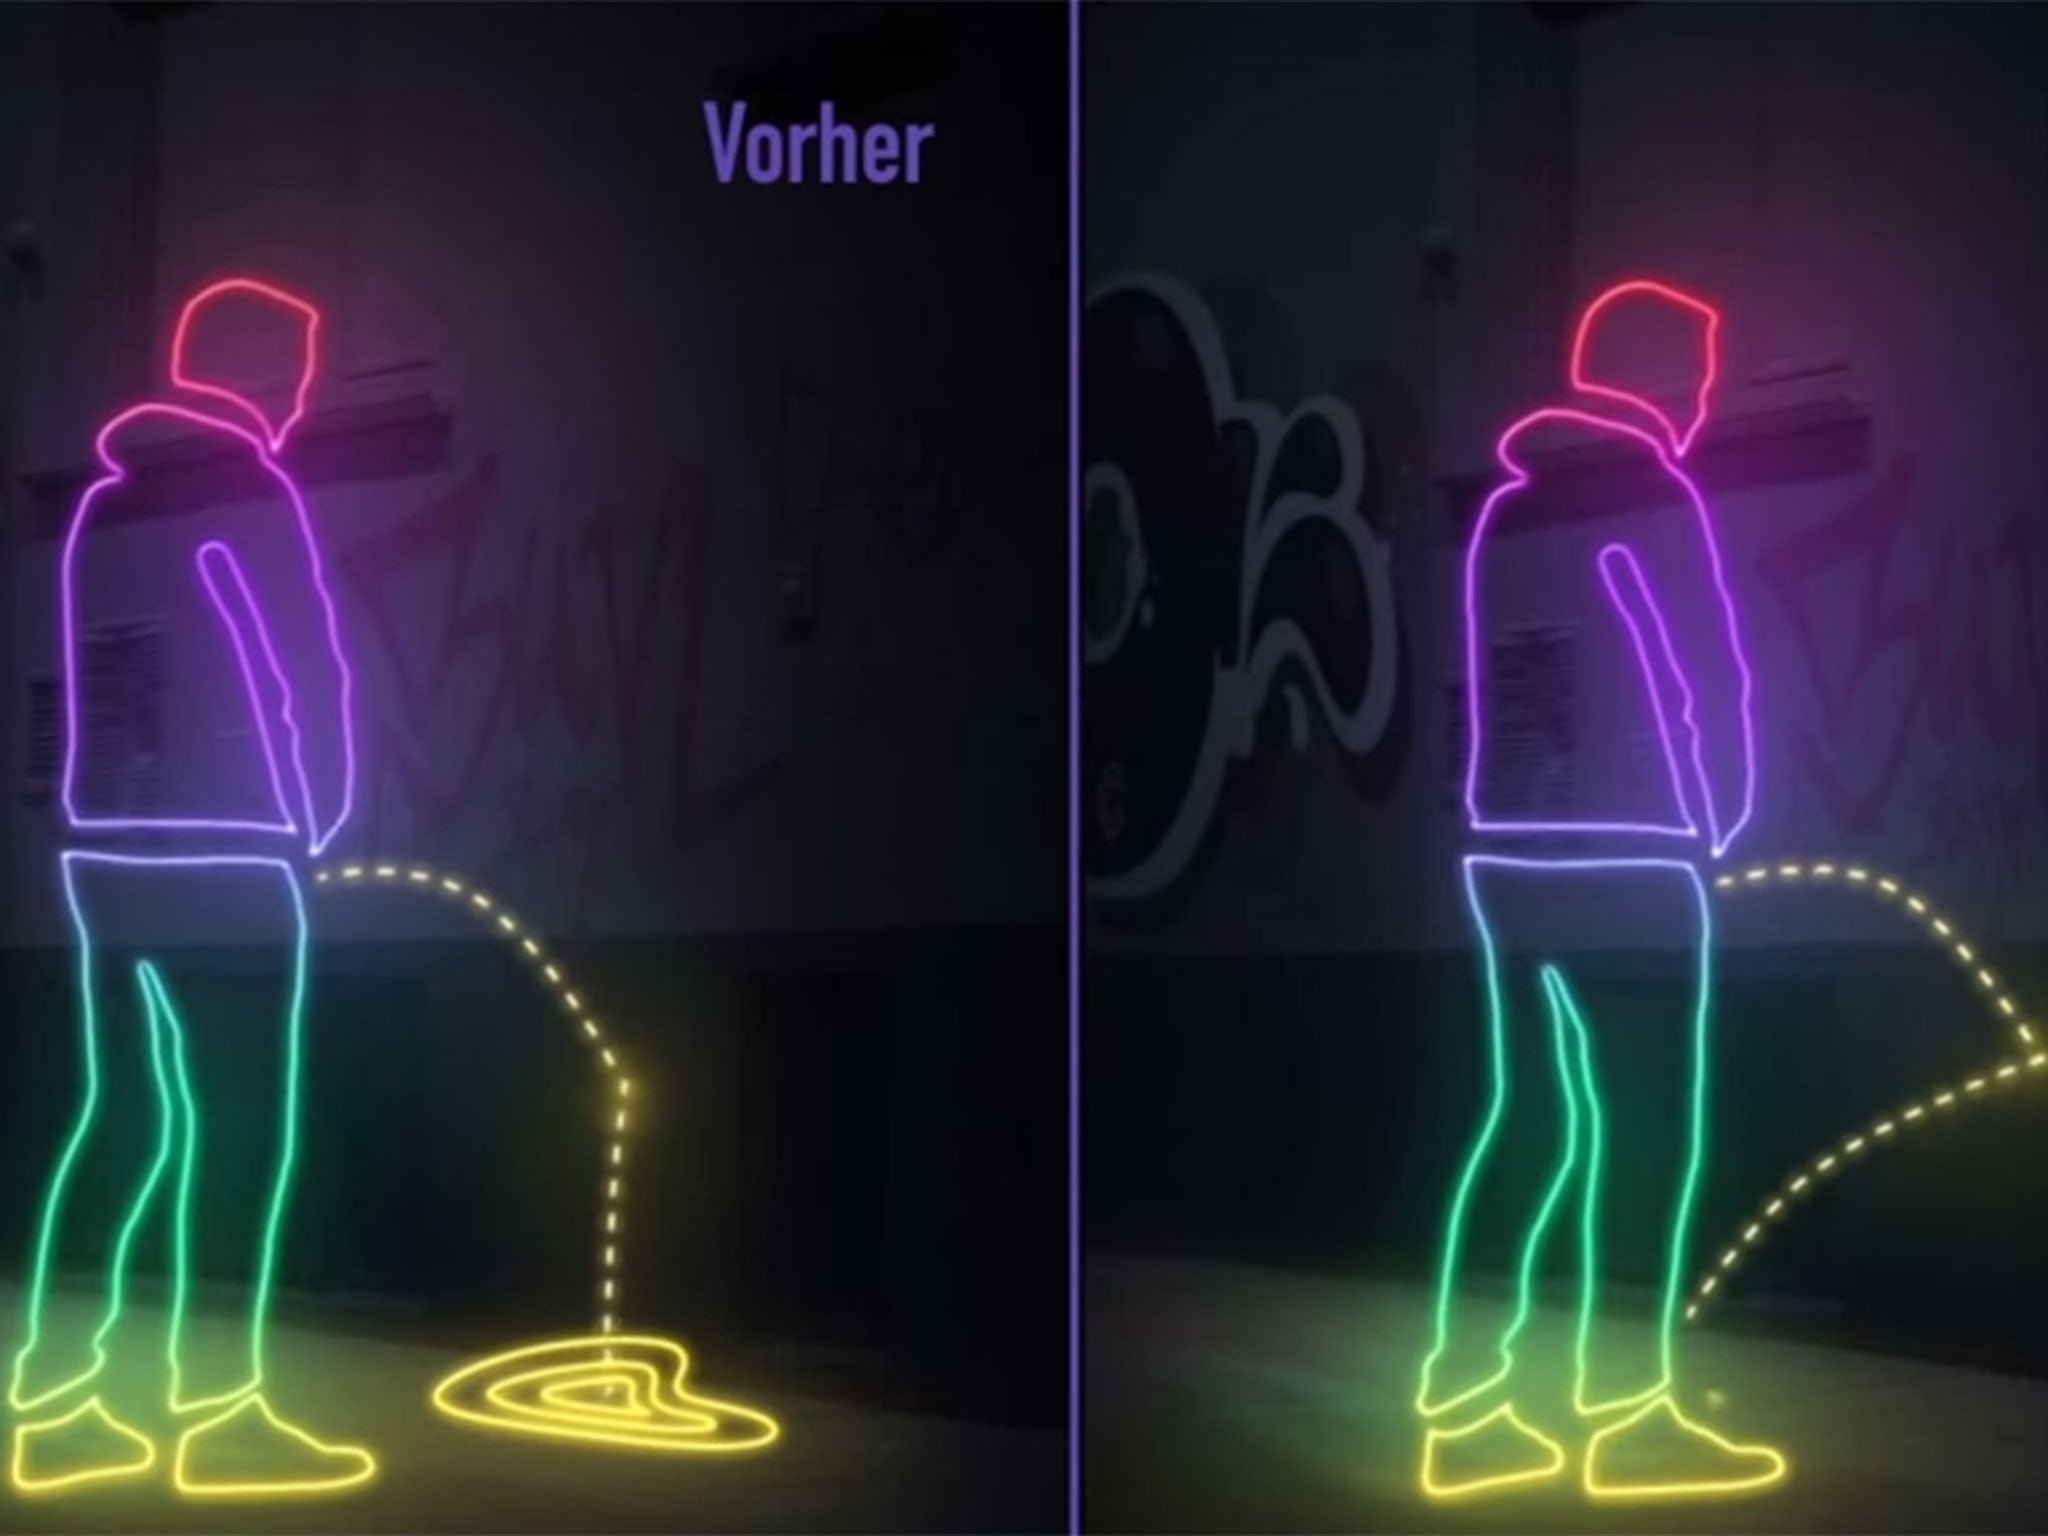 The paint repels liquids, meaning people who urinate against walls will have their pee bounce back